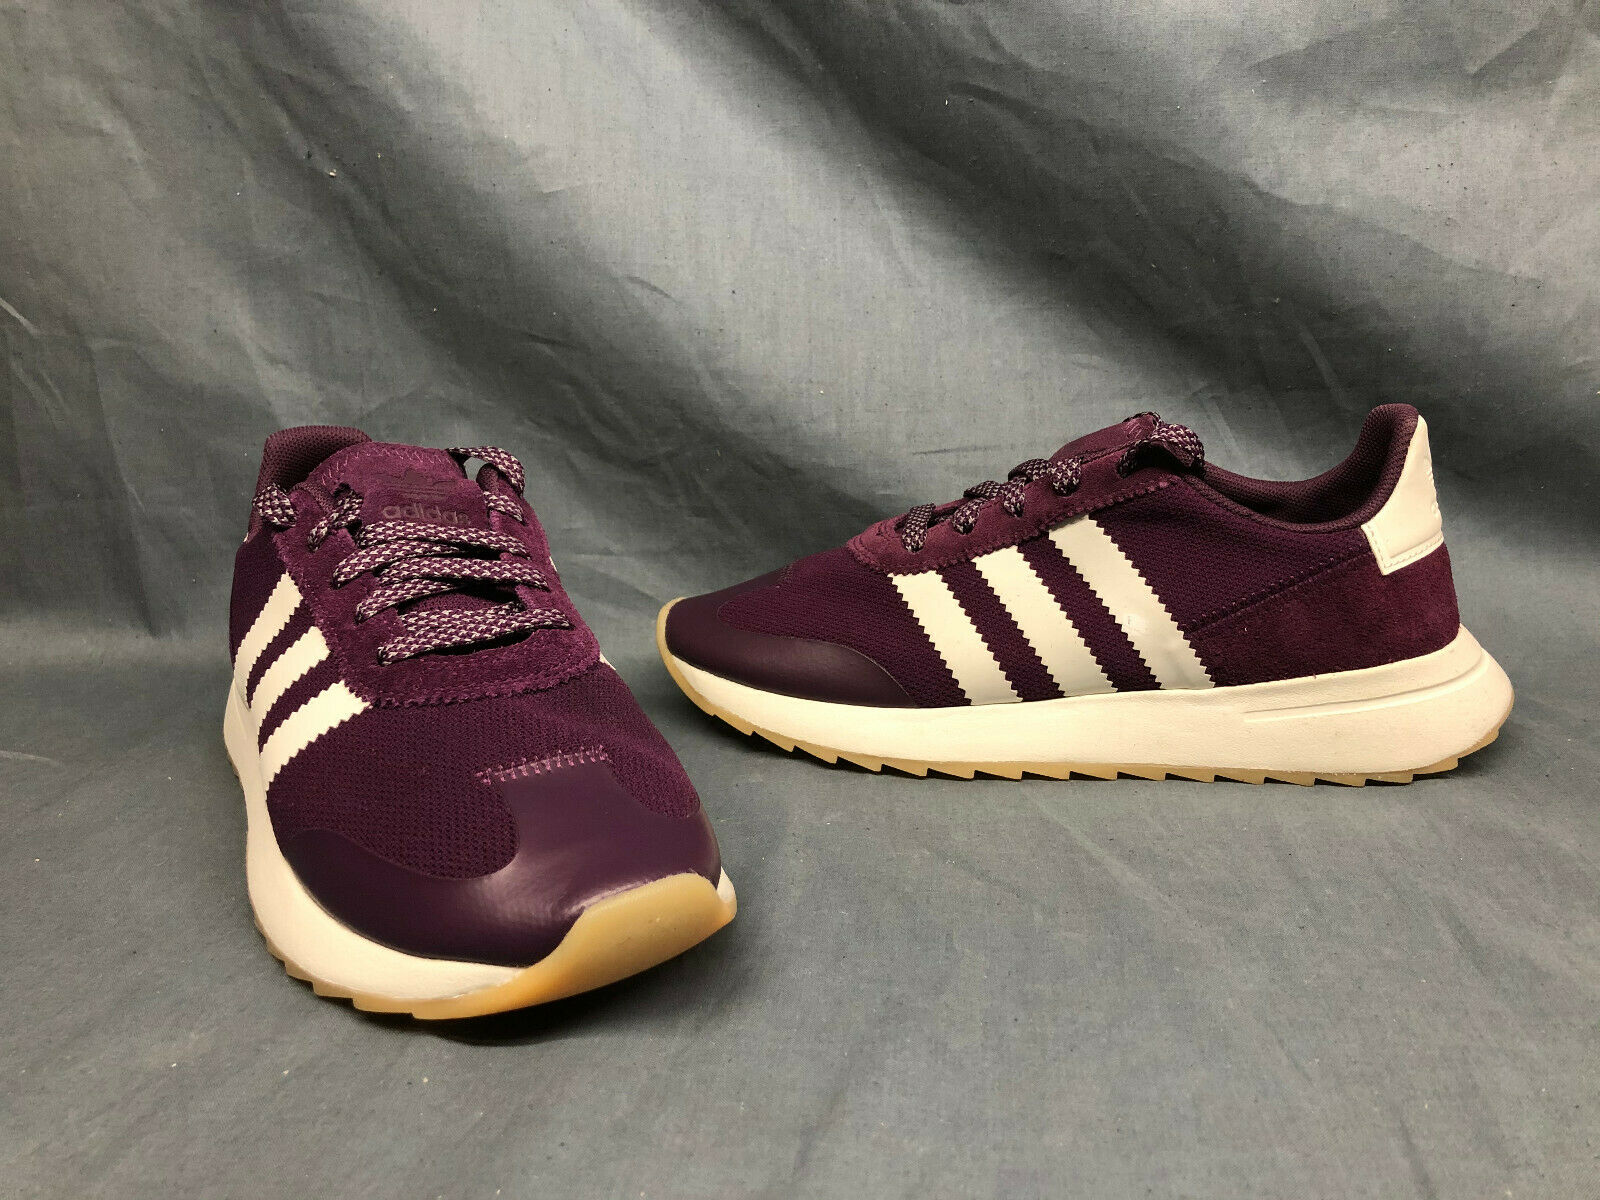 Adidas Women's Flashback Runner W Casual Sneakers Maroon White Size 6 NEW!